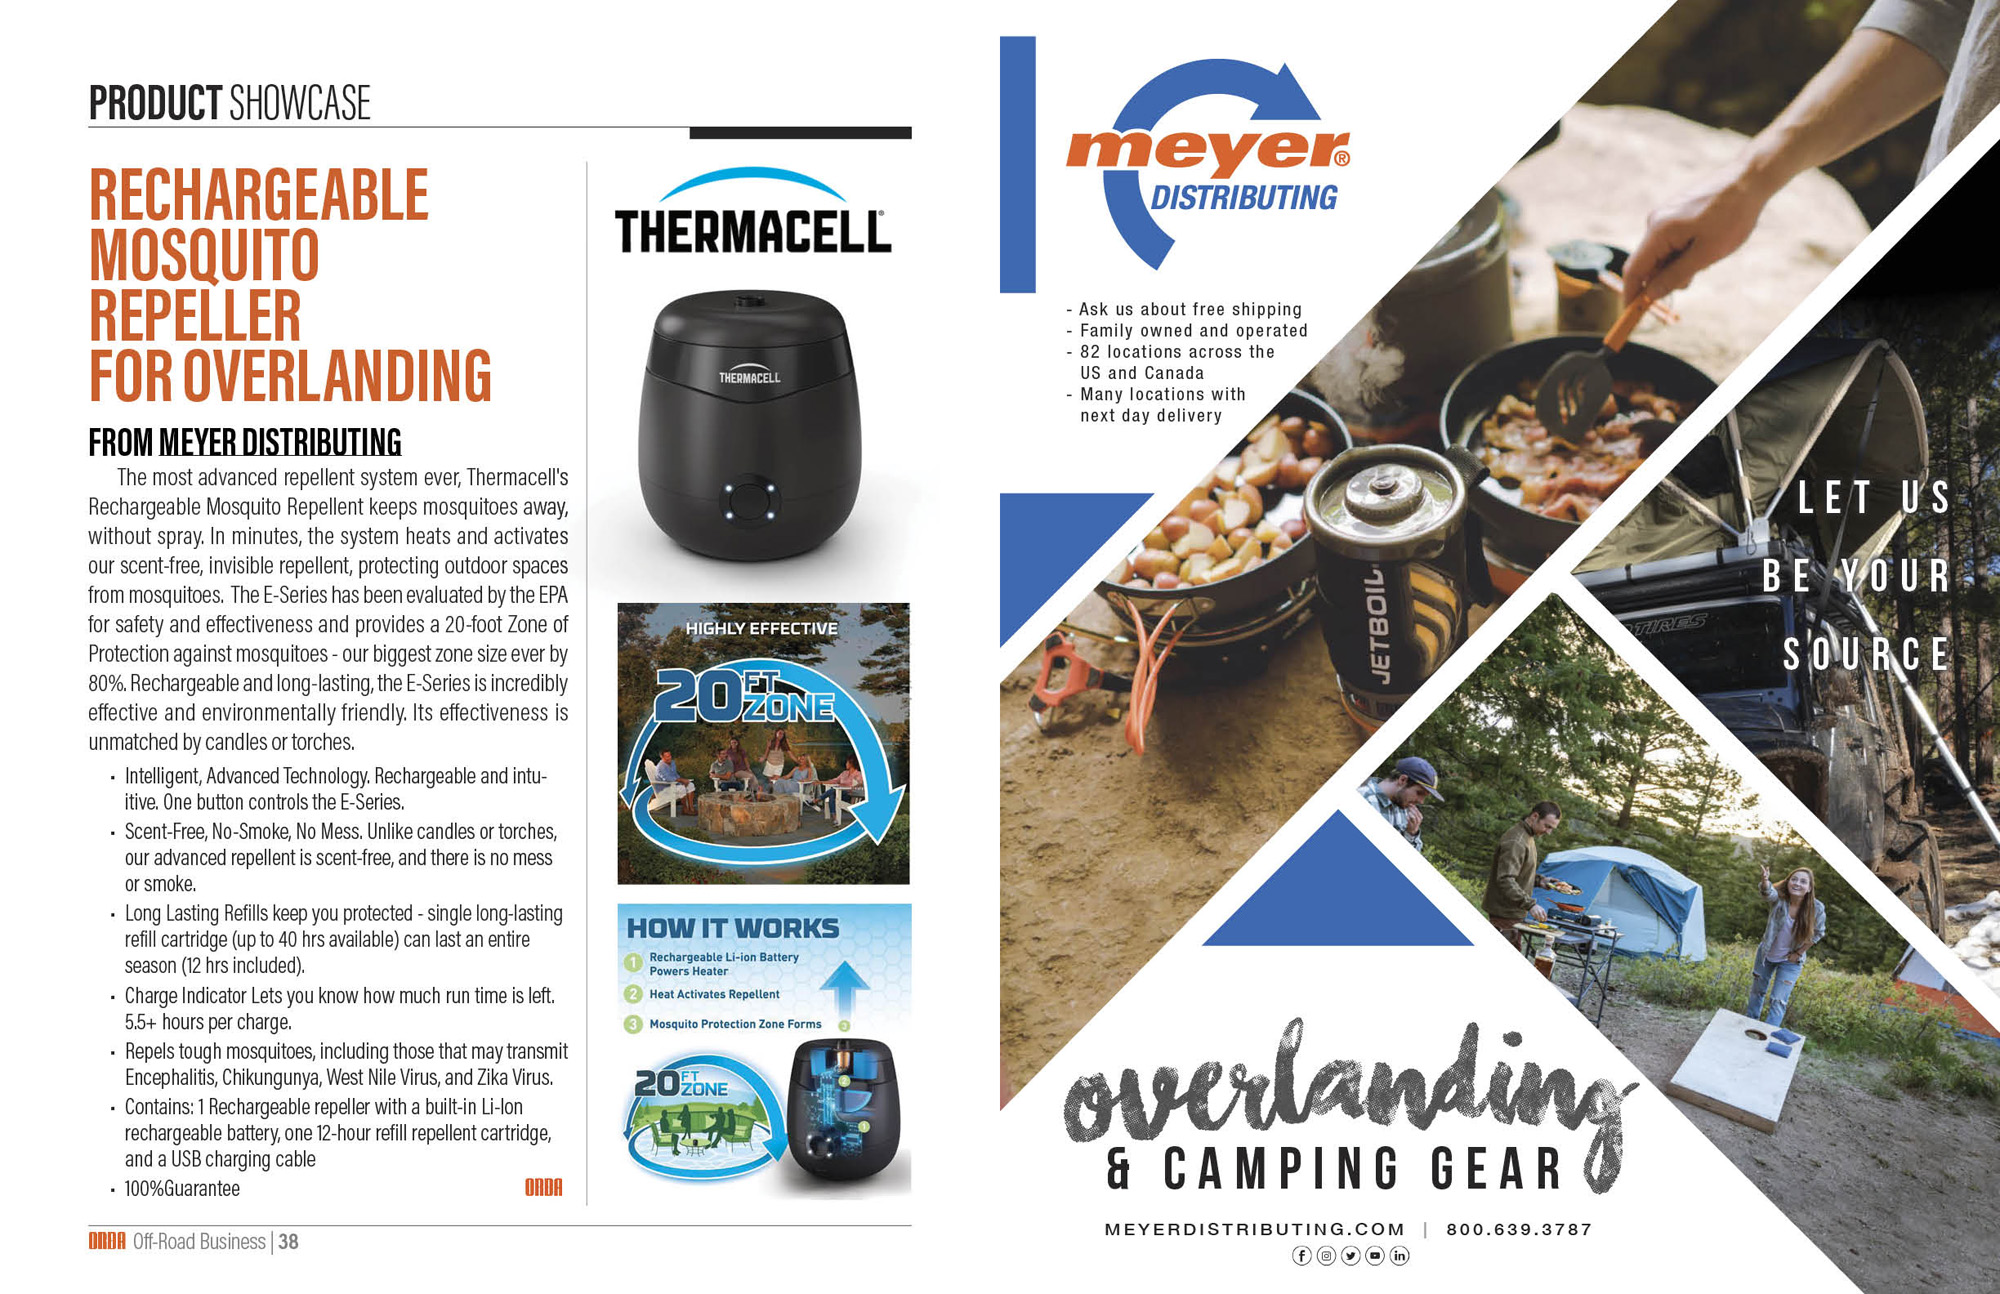 Rechargeable Mosquito
Repeller 
for Overlanding